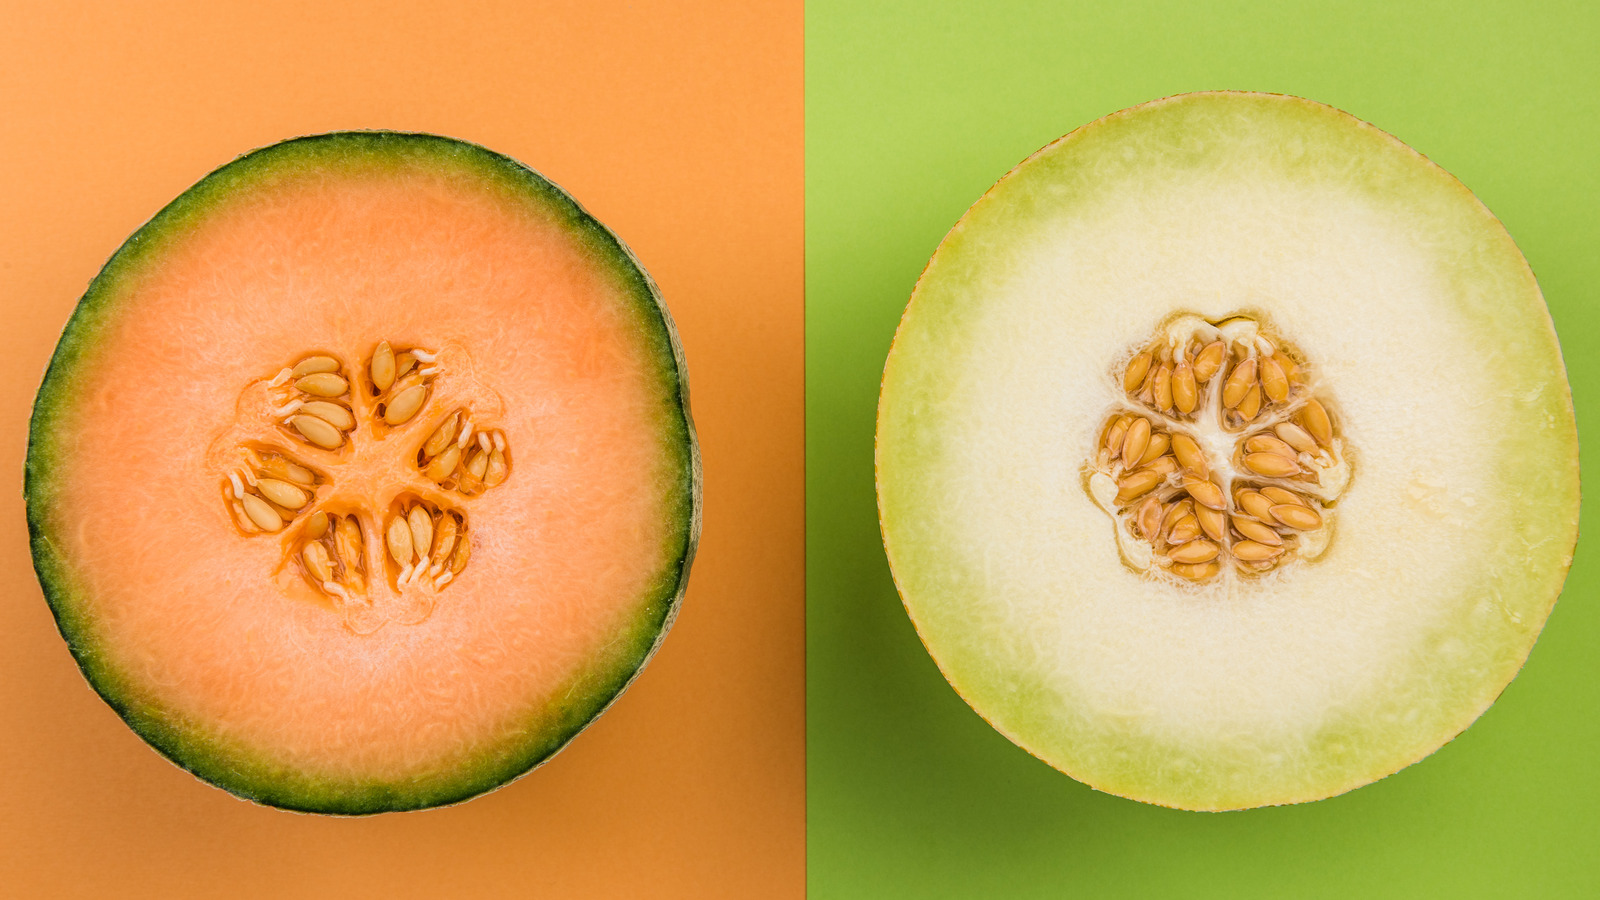 What Makes Honeydew Different From Cantaloupe